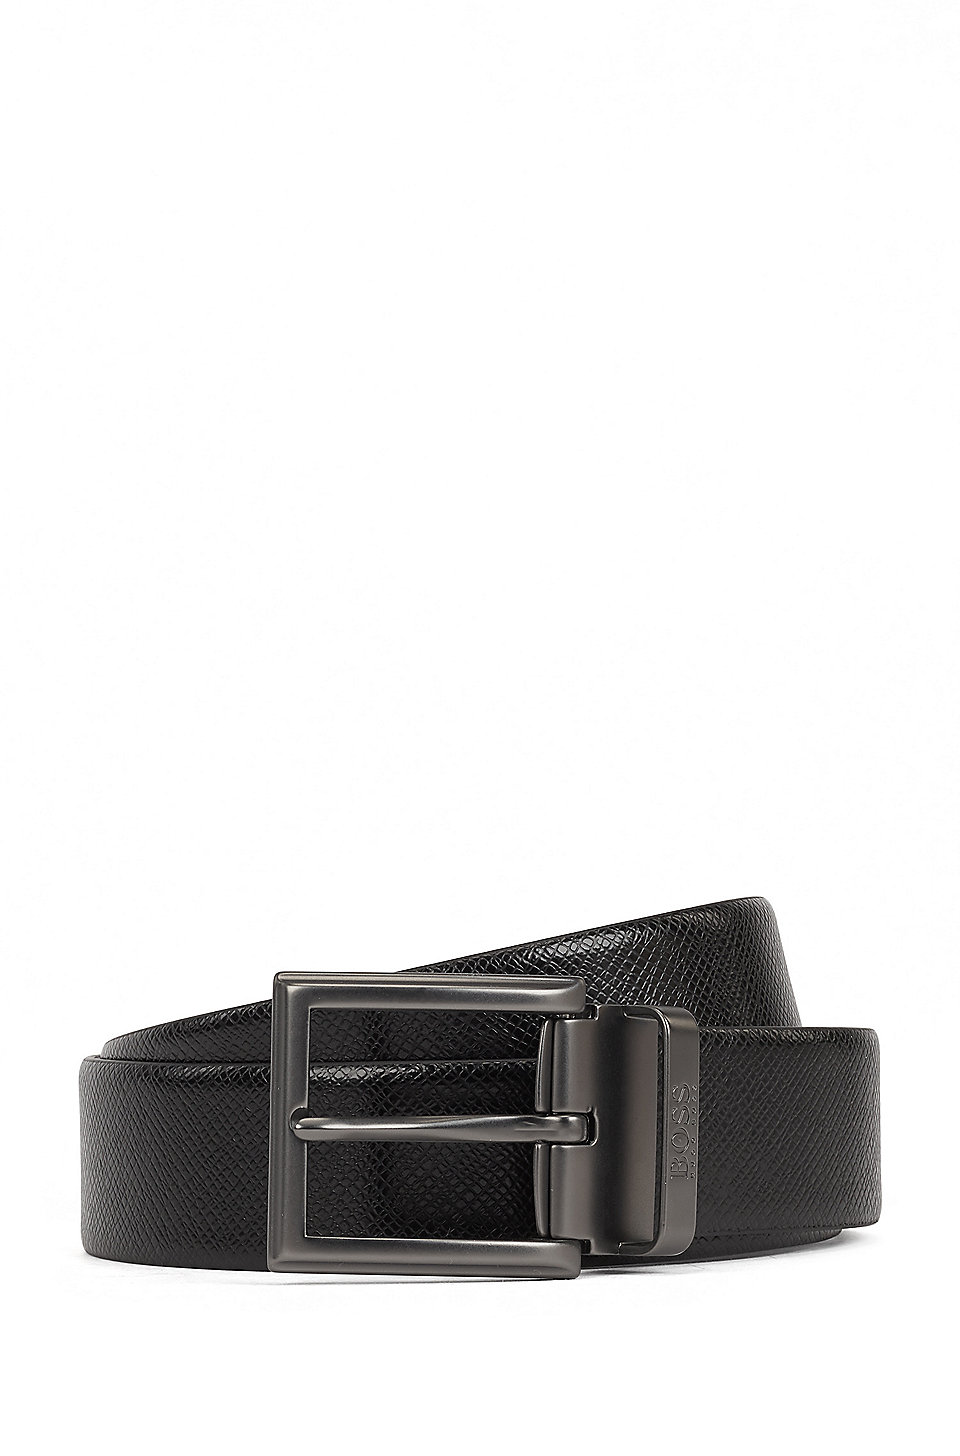 BOSS - Reversible belt in plain and structured Italian leather